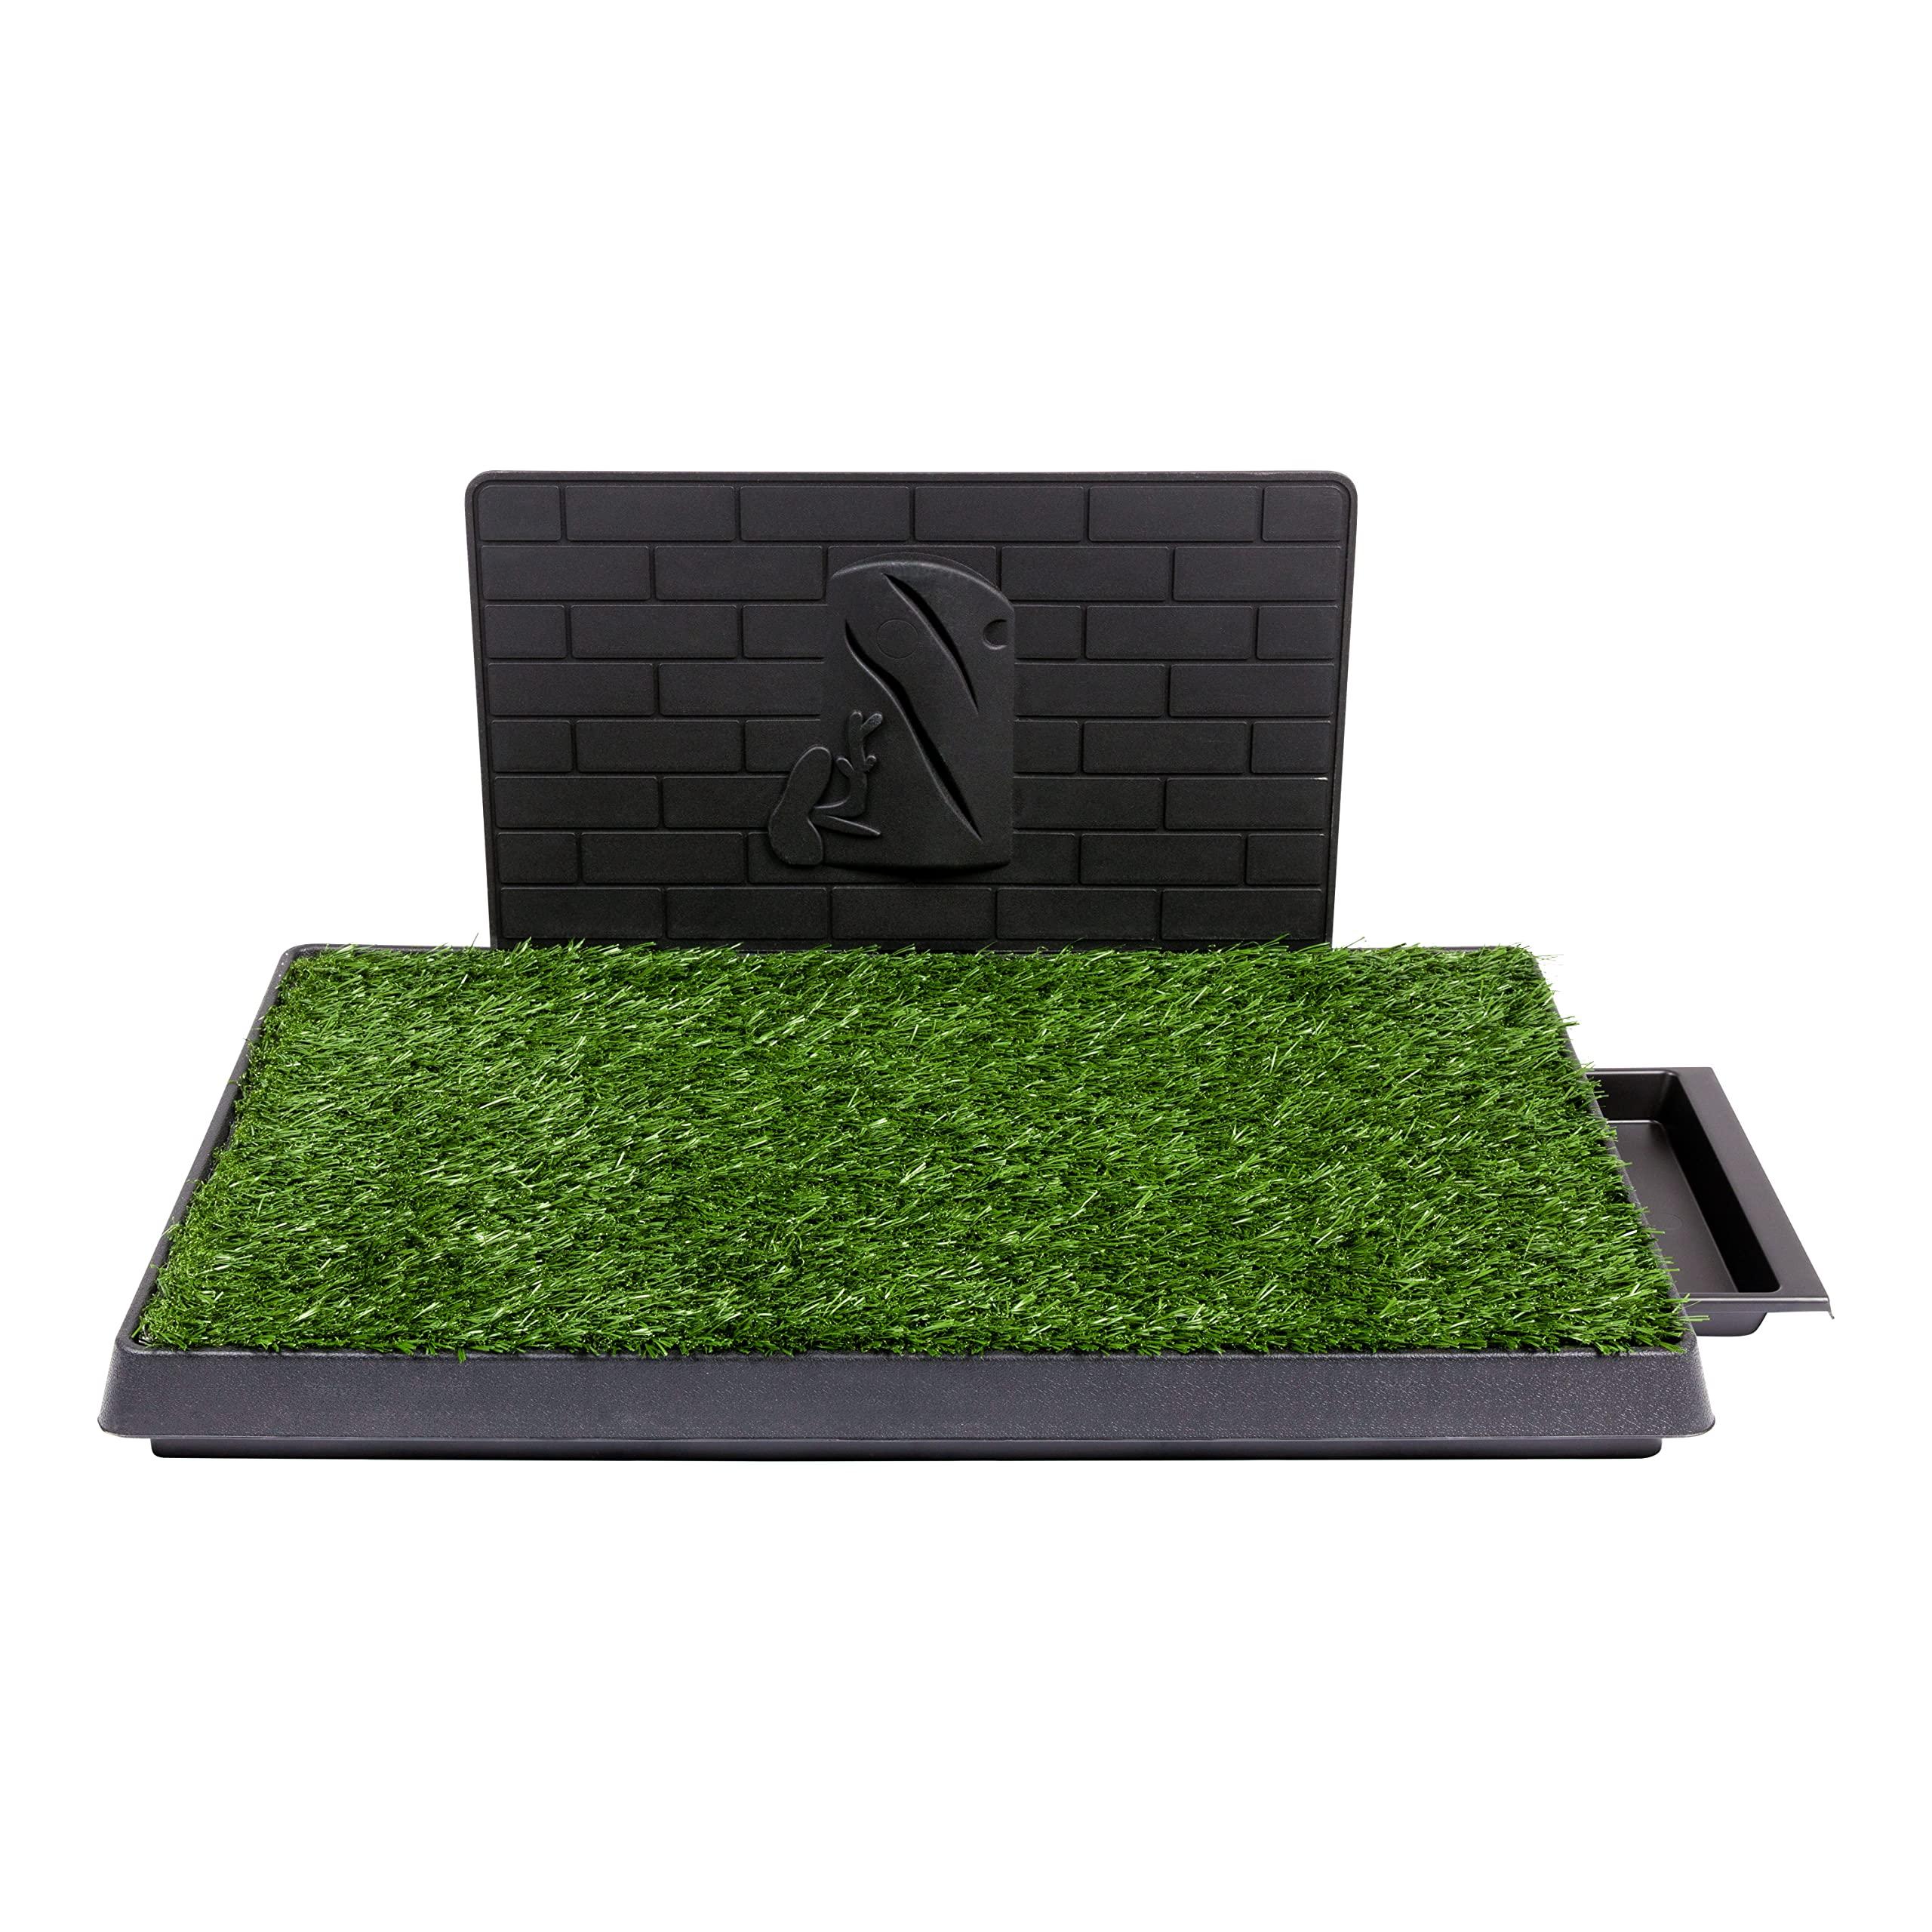 Downtown Pet Supply Dog Potty Tray Replacement for Dog Potty Grass Set - Puppy Training & Dog Housebreaking Supplies - Weatherproof and Washable Dog Pee Pad - 20 x 30 in (with Drawer & Wall)